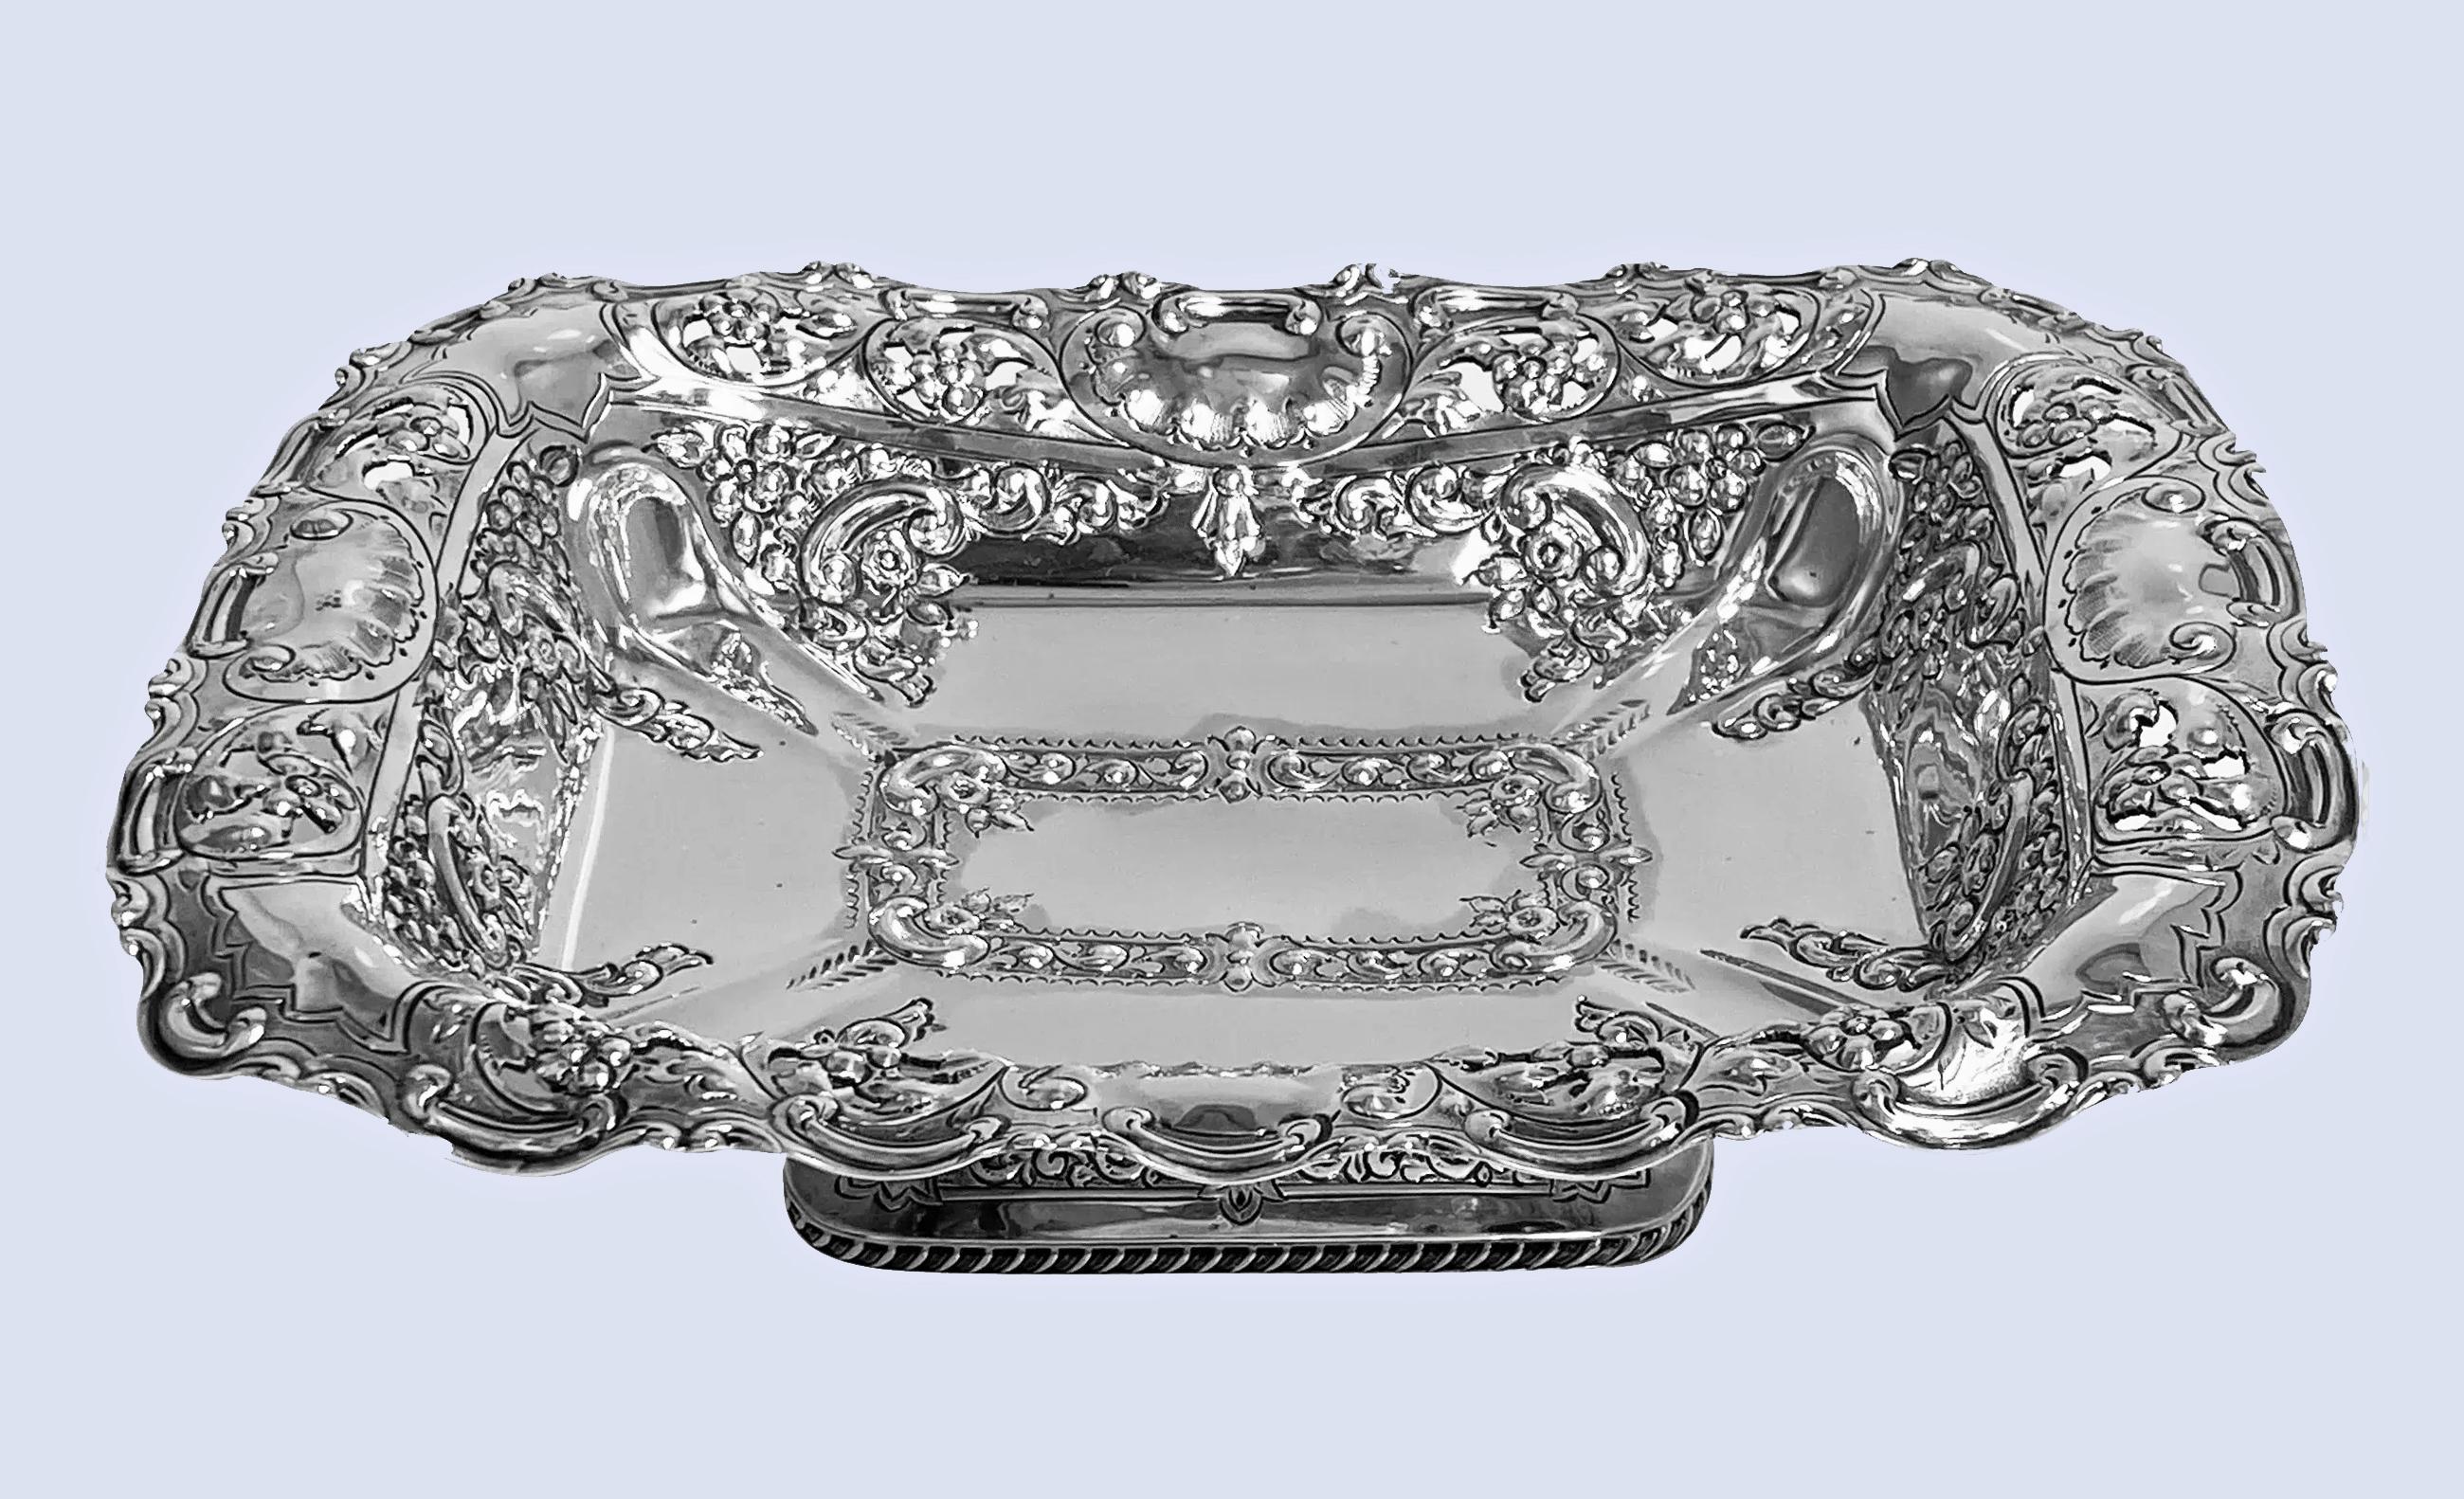 Antique English sterling silver Fruit Dish hallmarked Sheffield 1898 John Round. The rectangular shape Dish on pedestal foot with gadroon and foliage border, the bowl itself with richly decorated chased embossed and engraved foliage fruit decoration